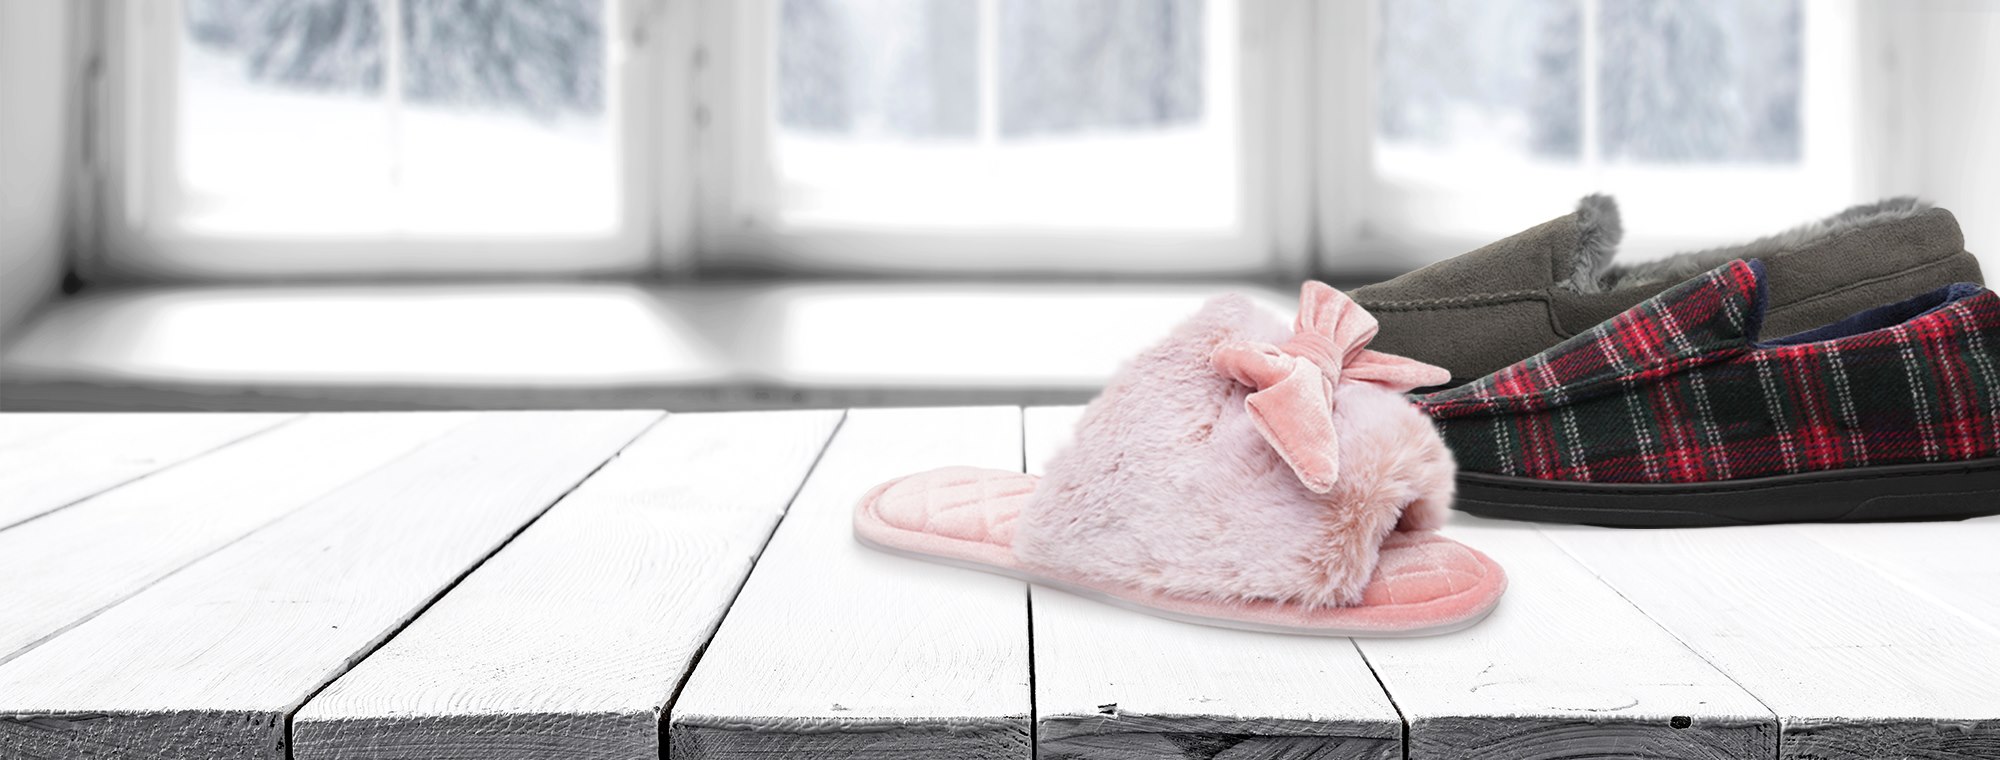 Just In! New Autumn/Winter Slipper Collection